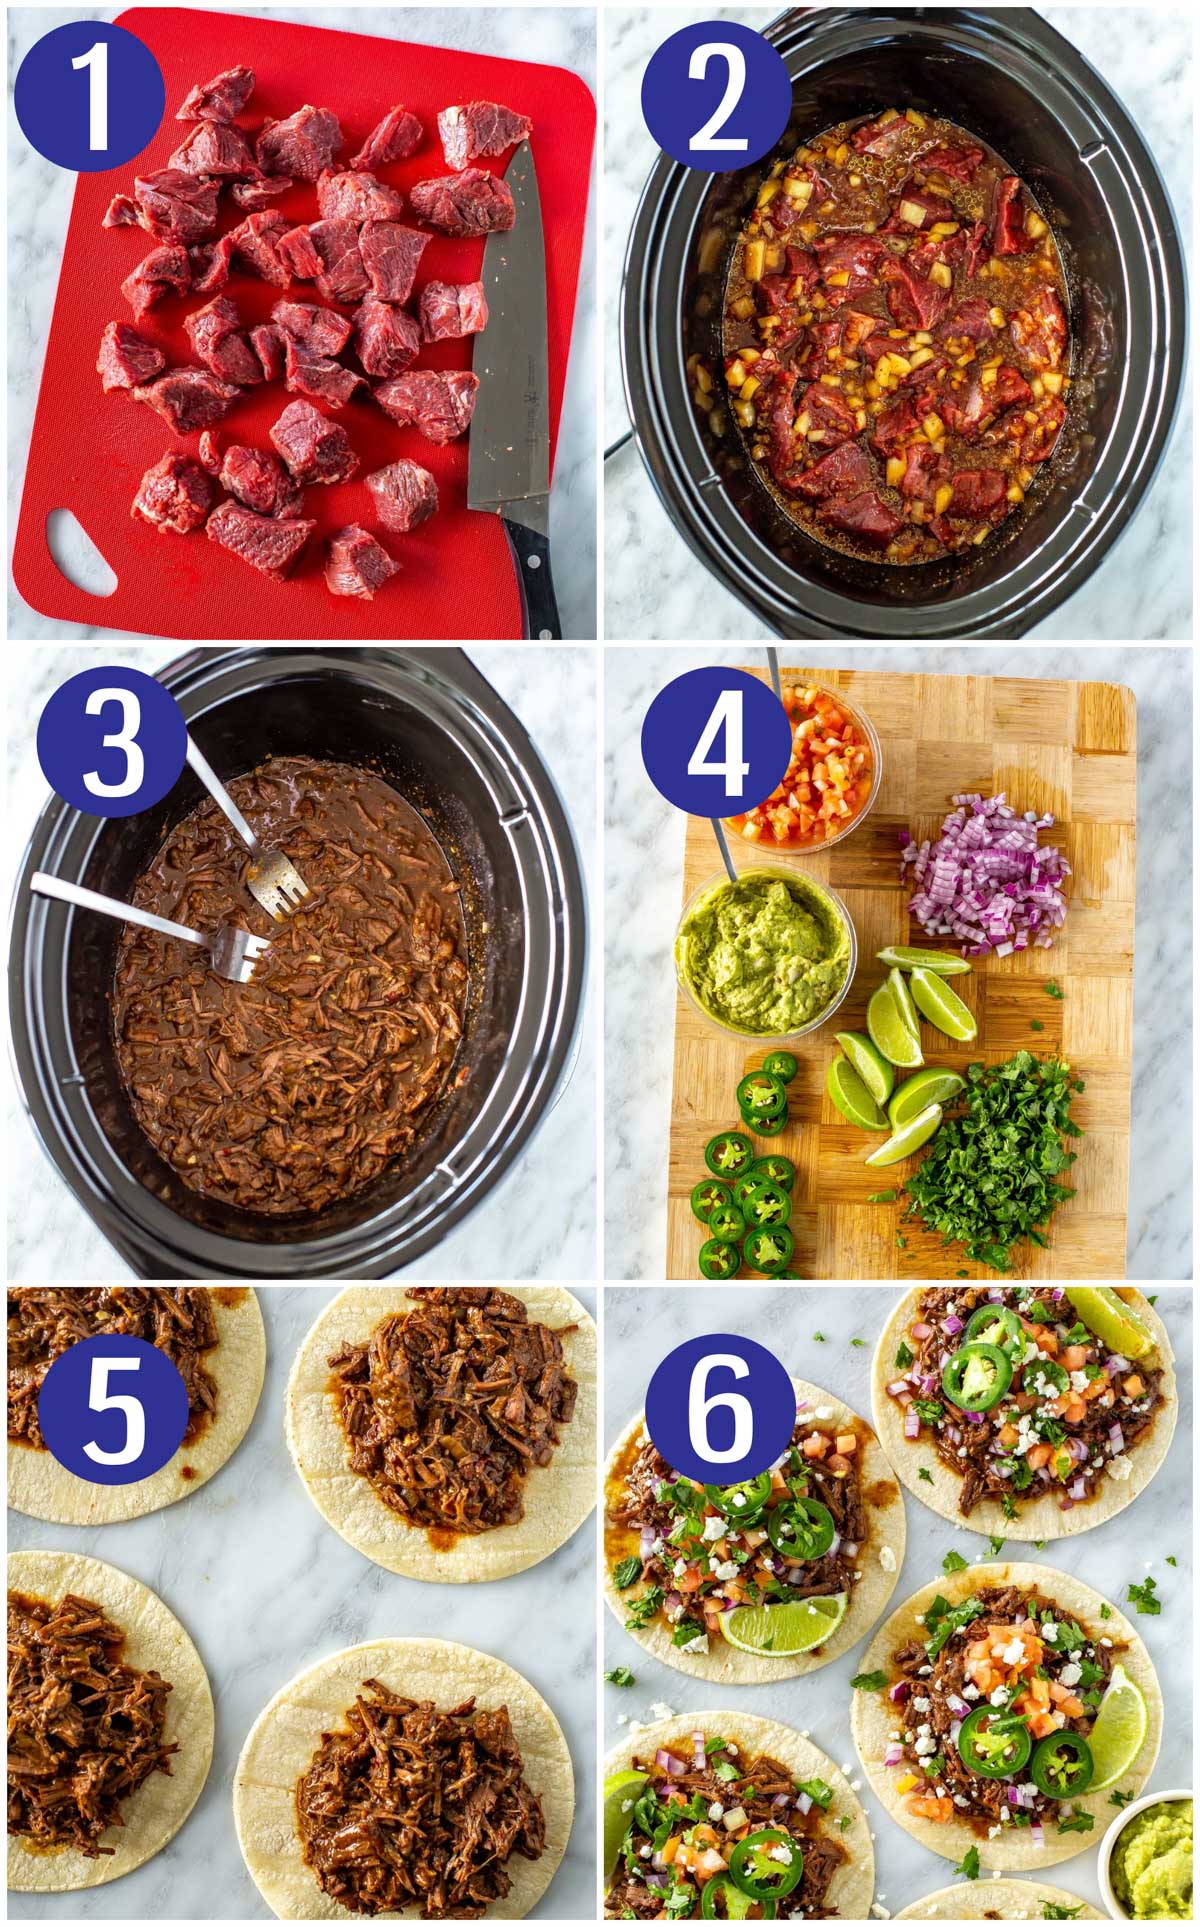 Step-by-step instructions collage for making shredded beef tacos: cut yp beef into 1 inch cubes, put it in the slow cooker alongside other ingredients, shred cooked beef, assemble toppings, then assemble tacos.